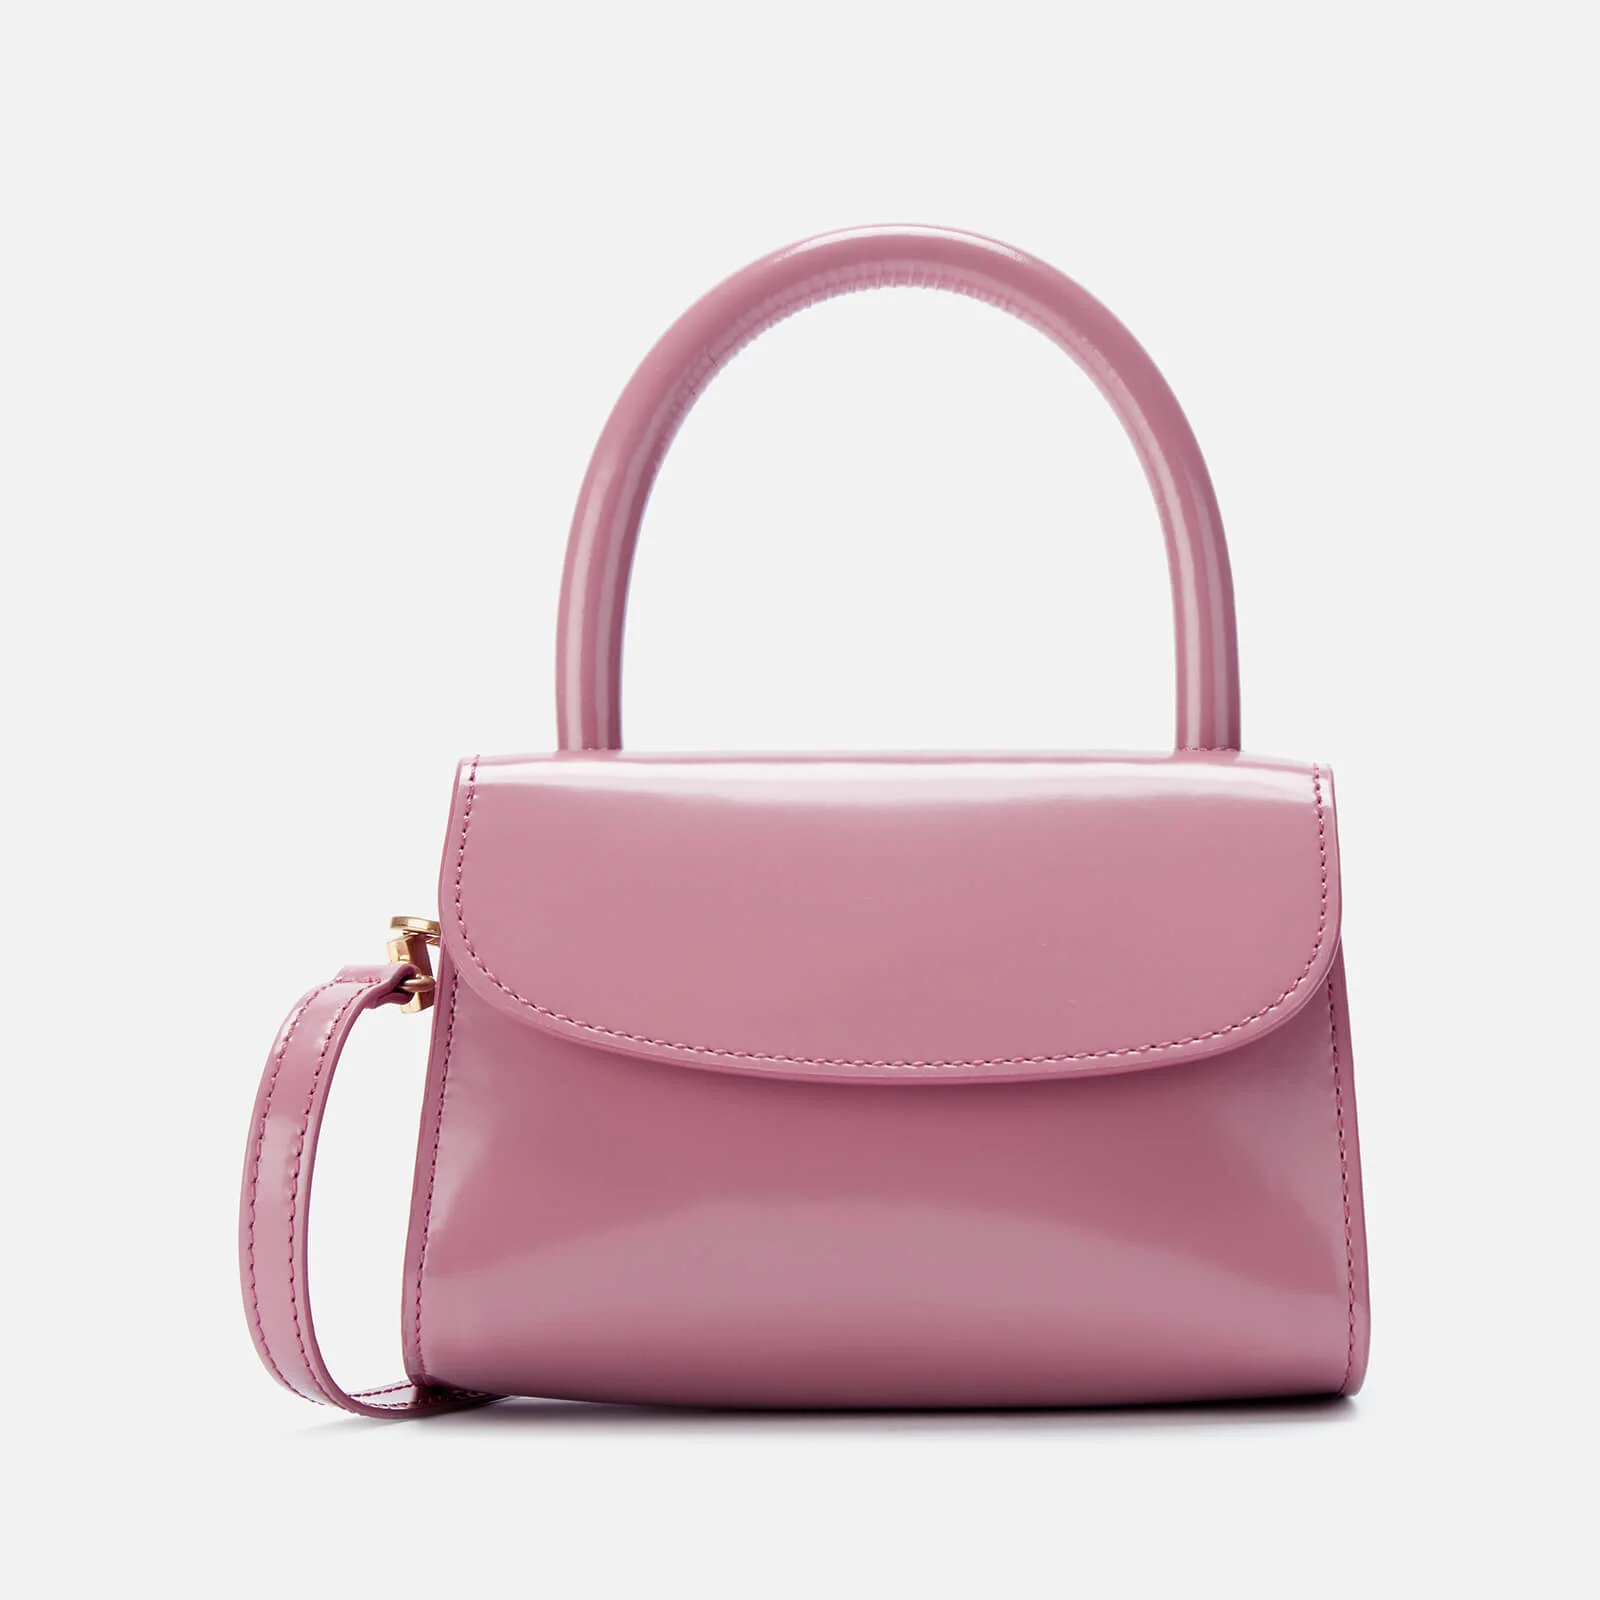 BY FAR Women's Mini Semi Patent Leather Tote Bag - Pink Image 1